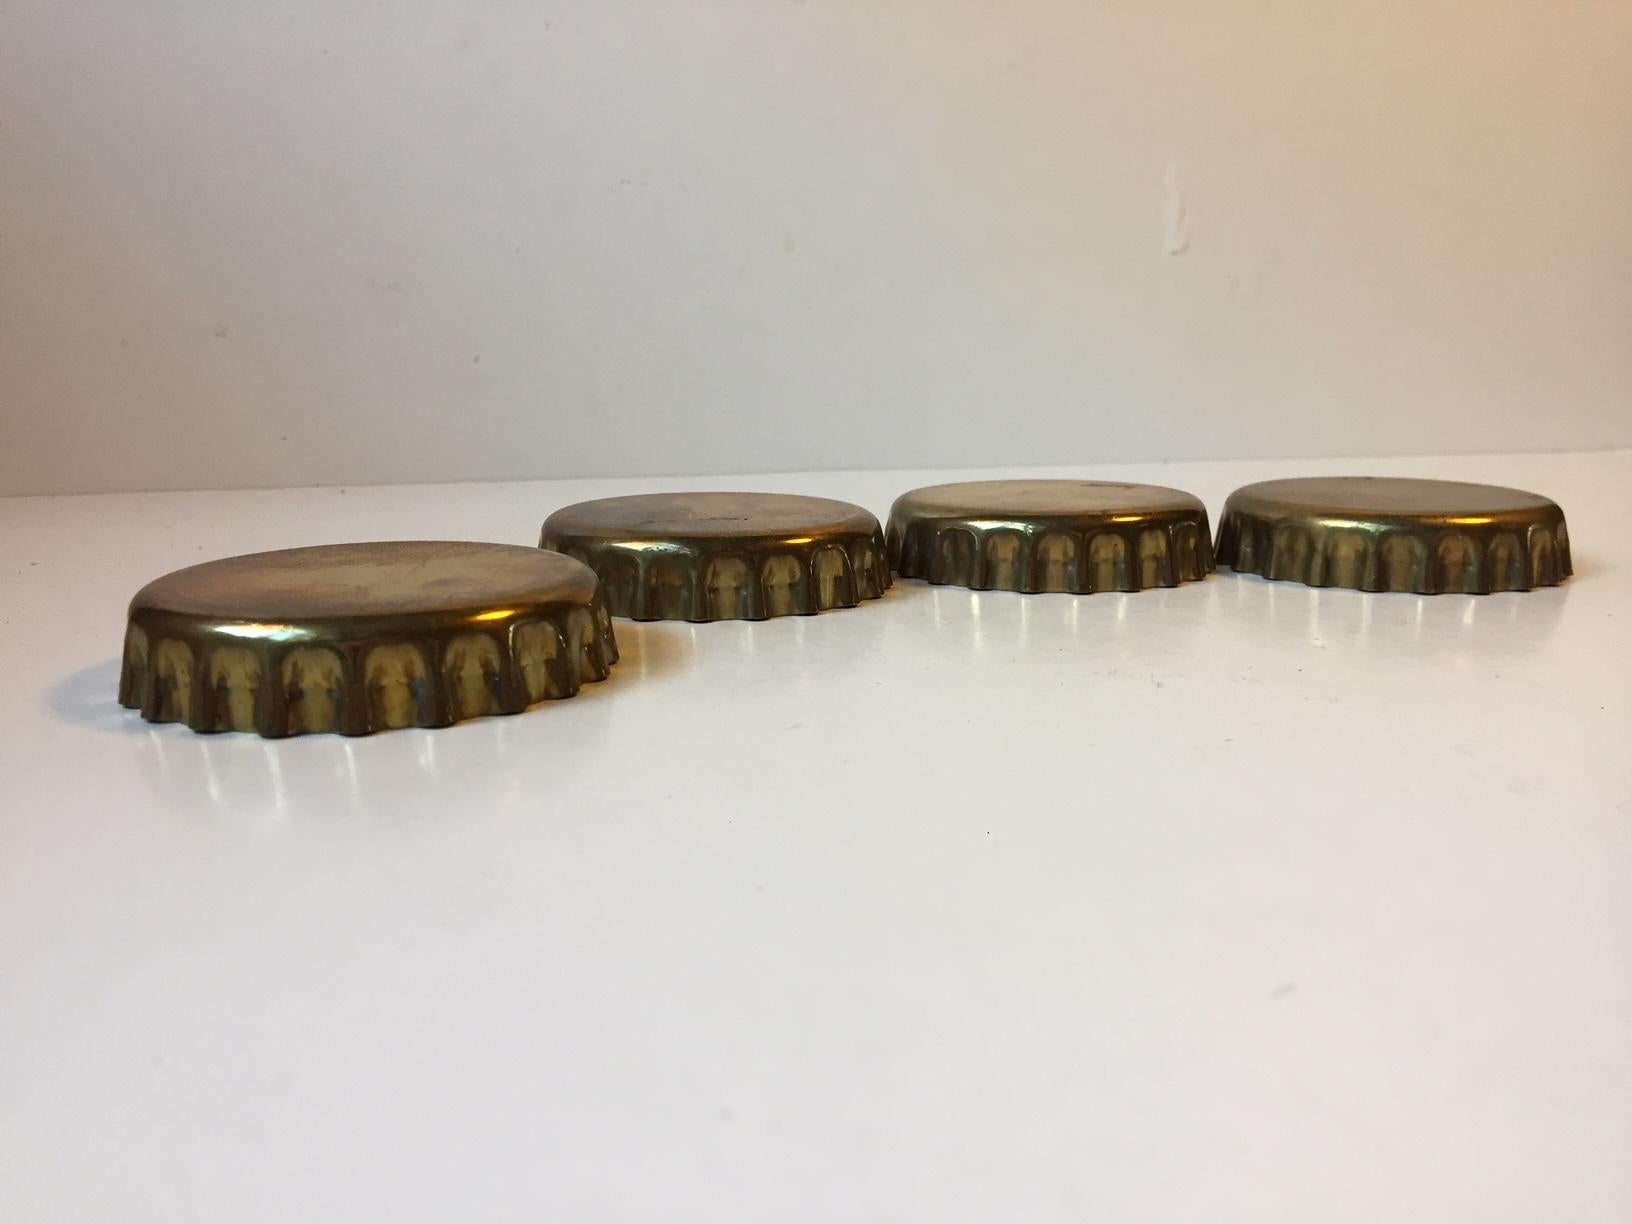 This is a set of 4 drink coasters in brass that are shaped as bottle caps. They are designed and manufactured by Georg Jensen in Denmark during the early 1980s.